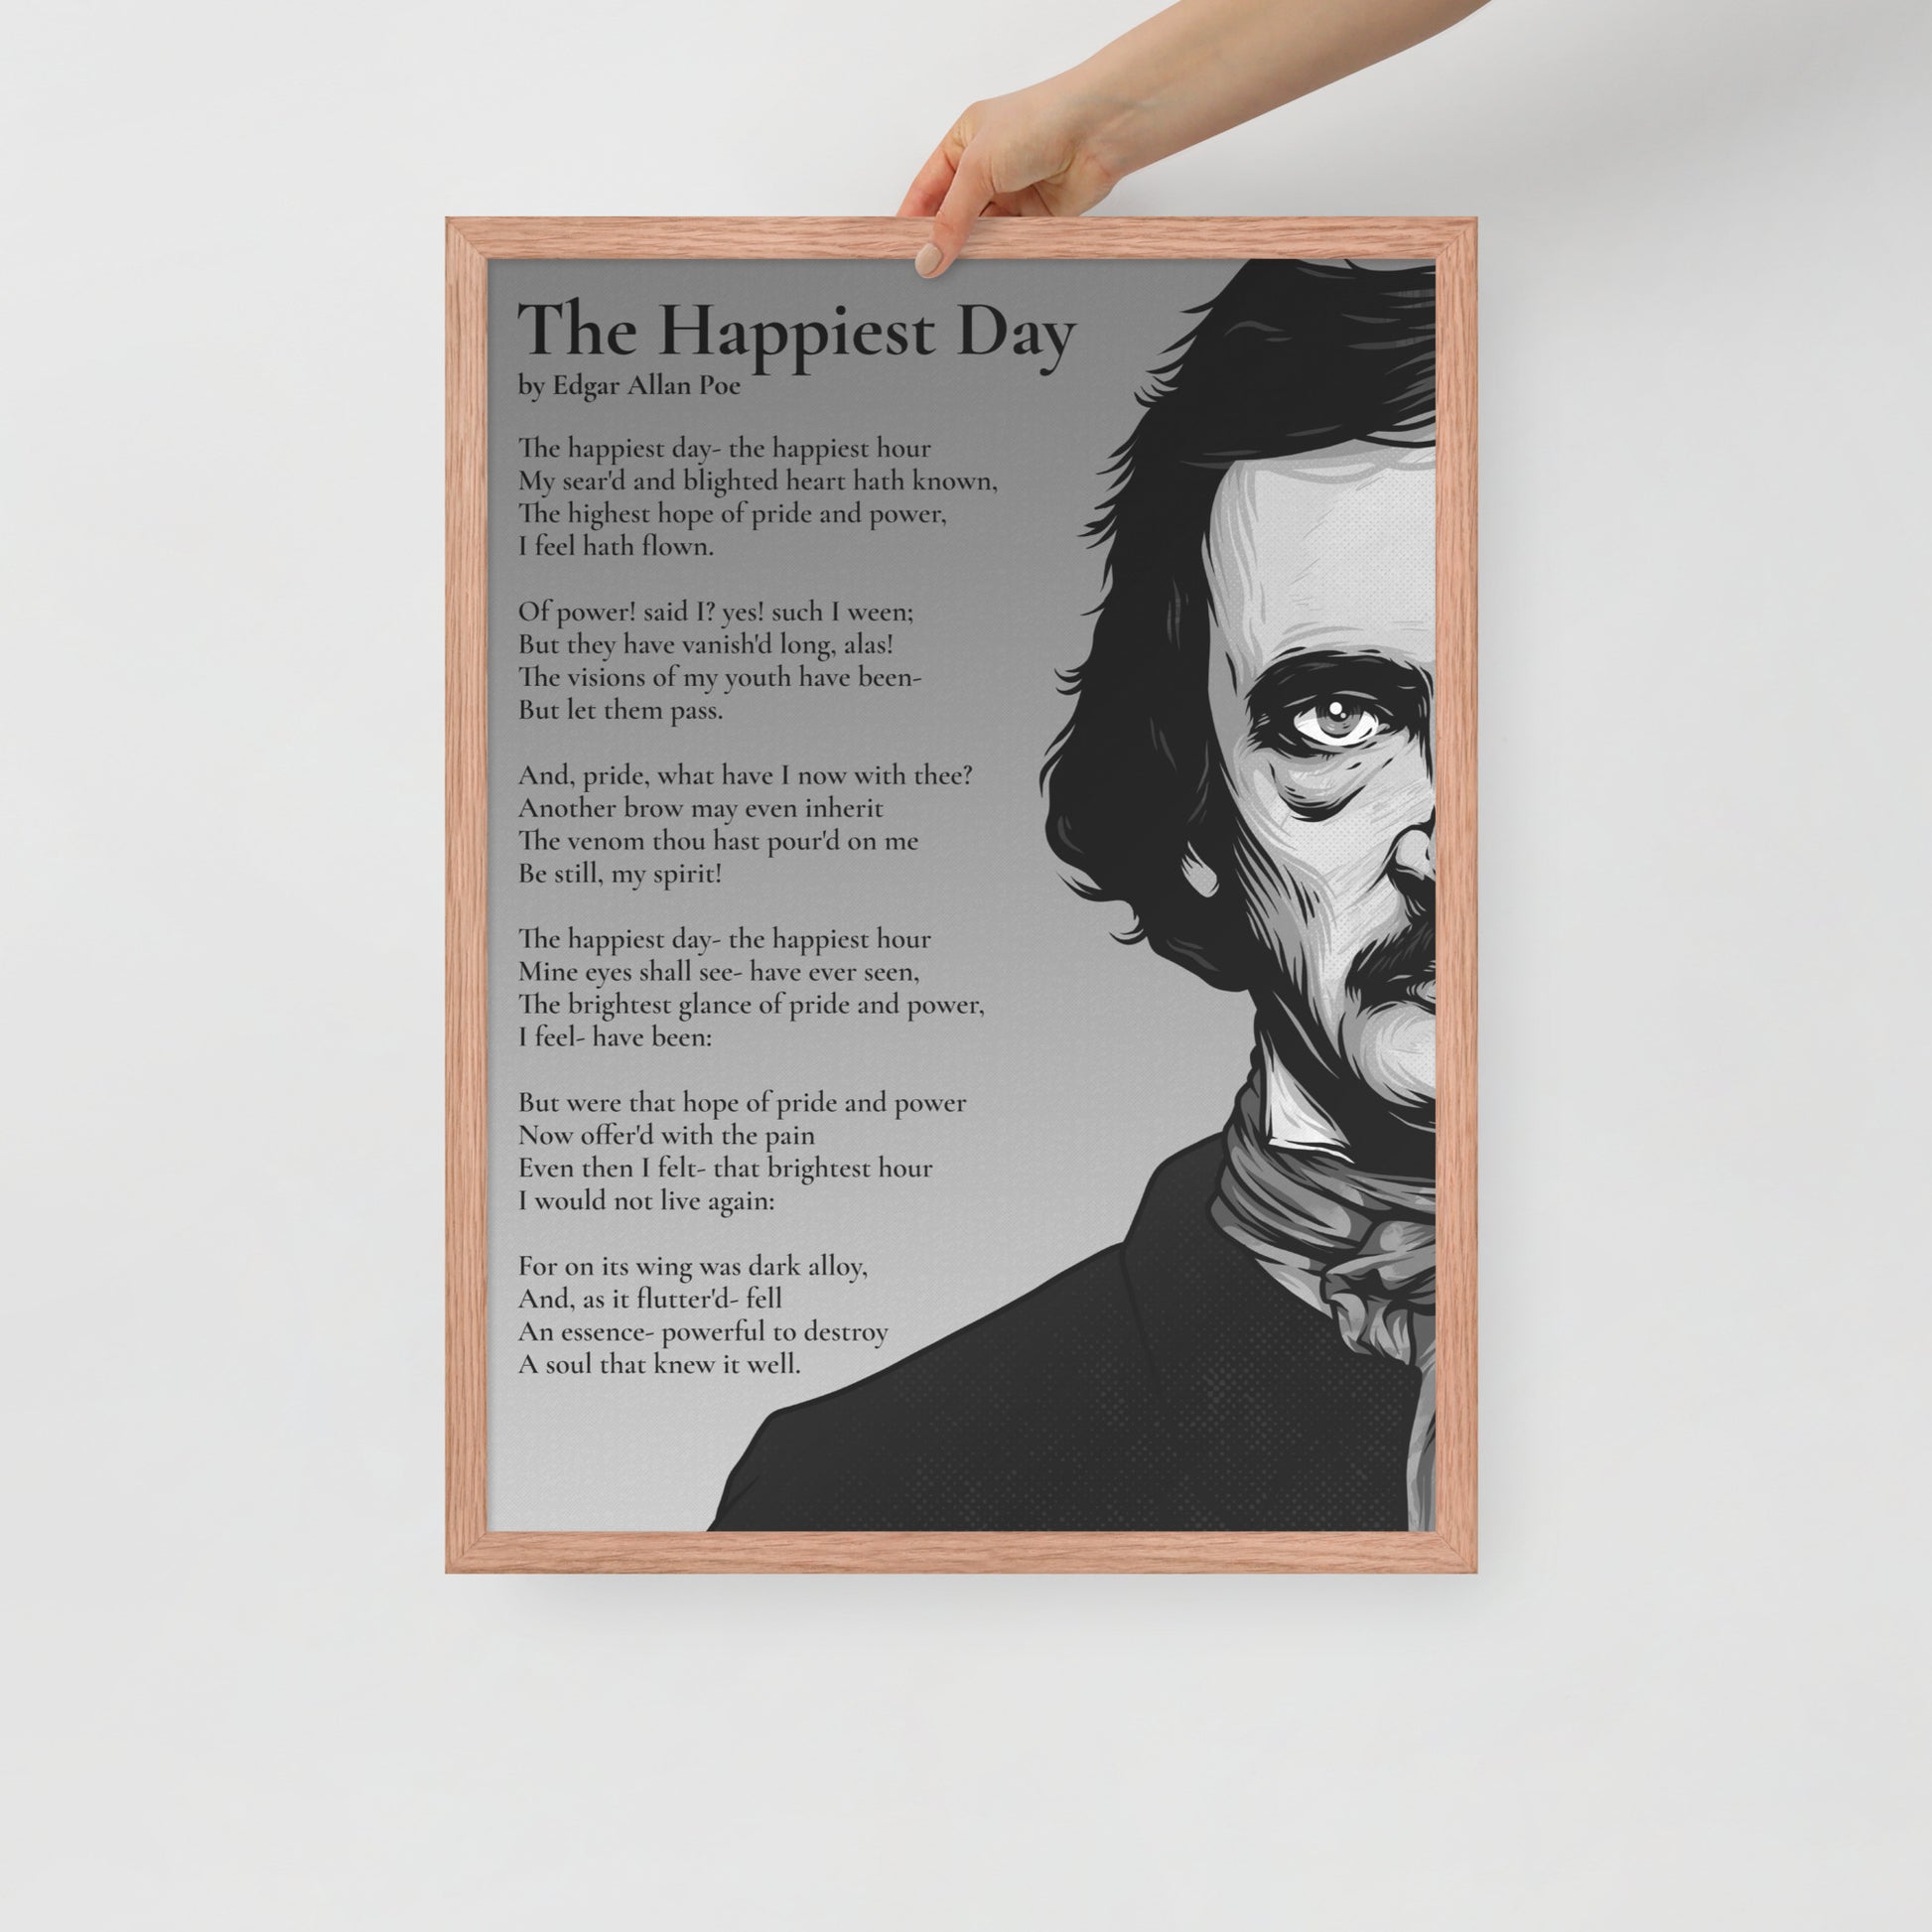 Edgar Allan Poe's 'The Happiest Day' Framed Matted Poster - 18 x 24 Red Oak Frame